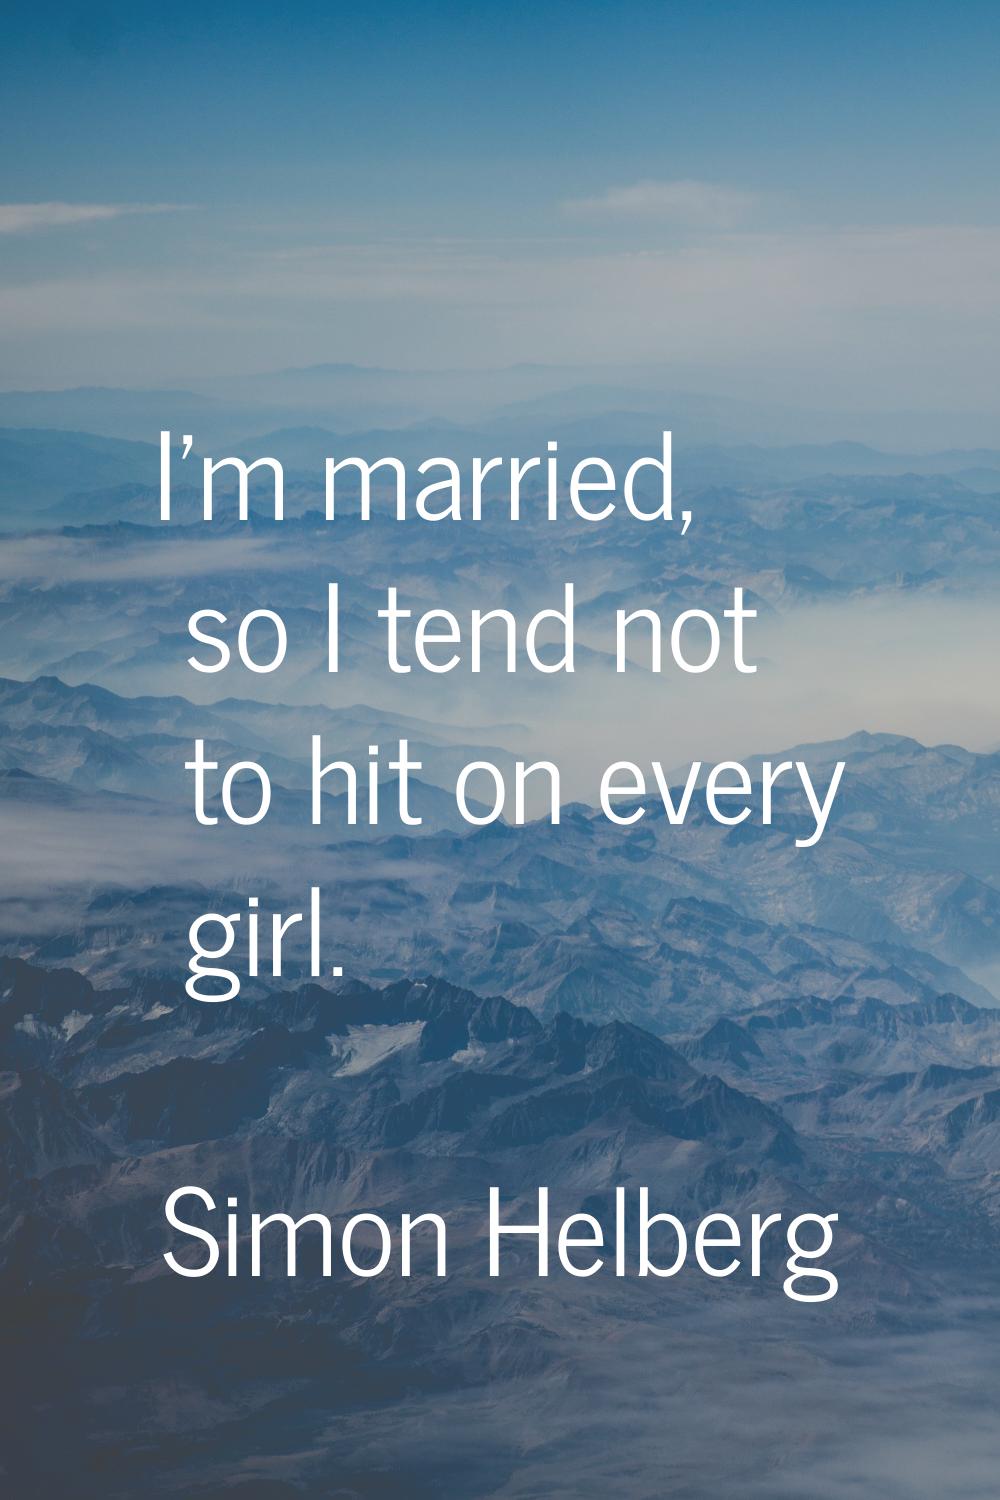 I'm married, so I tend not to hit on every girl.